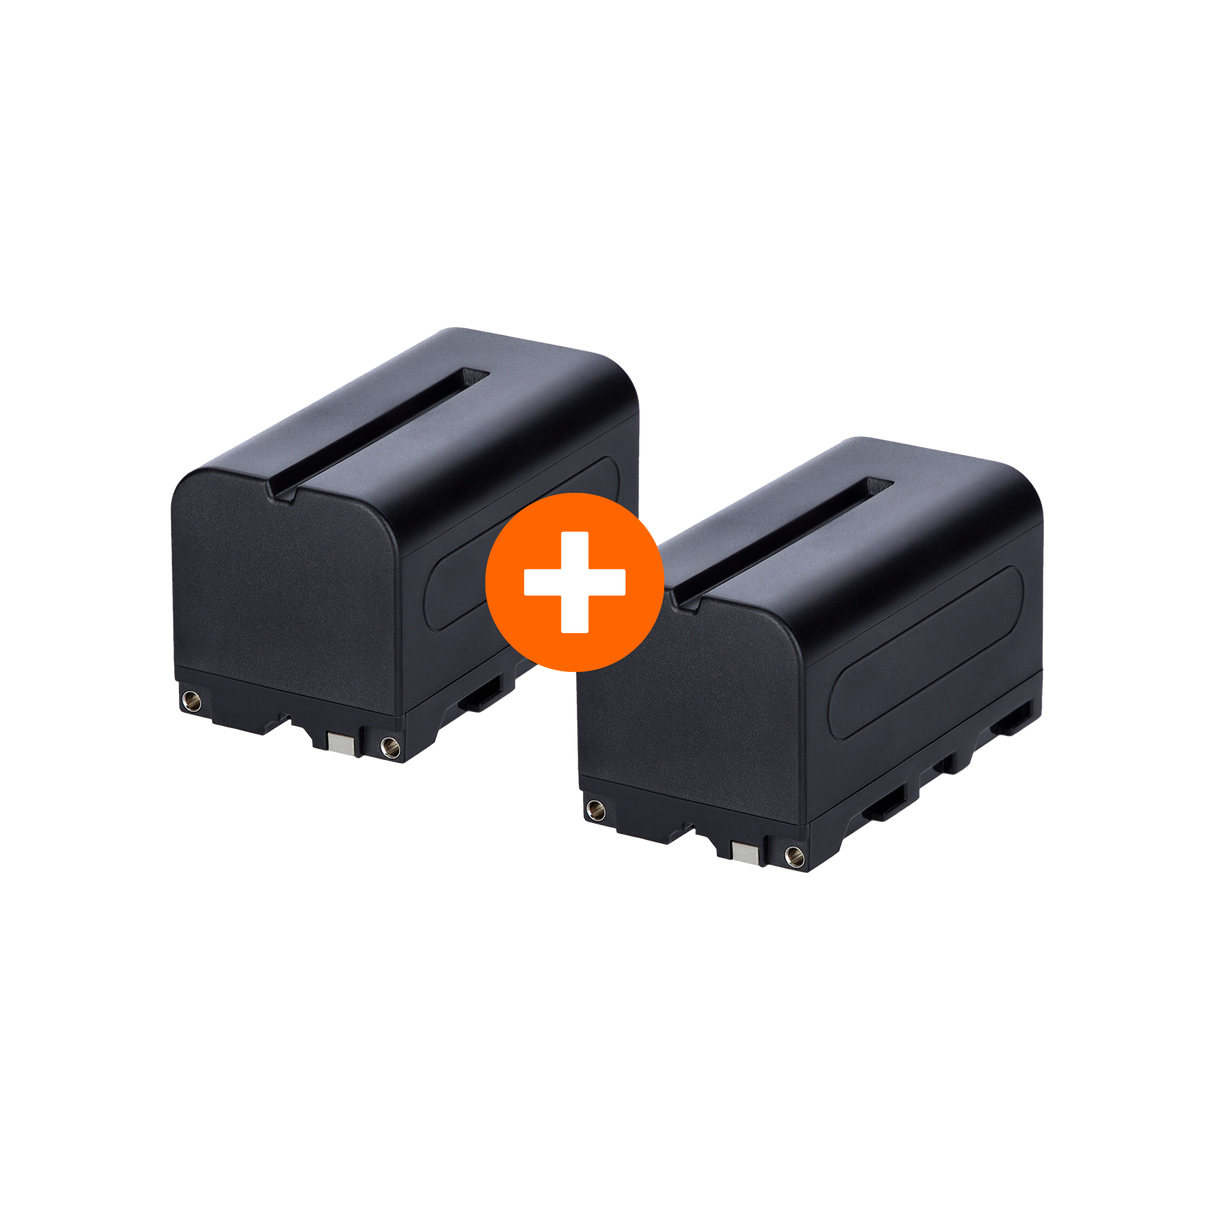 Battery type Sony NP-F750